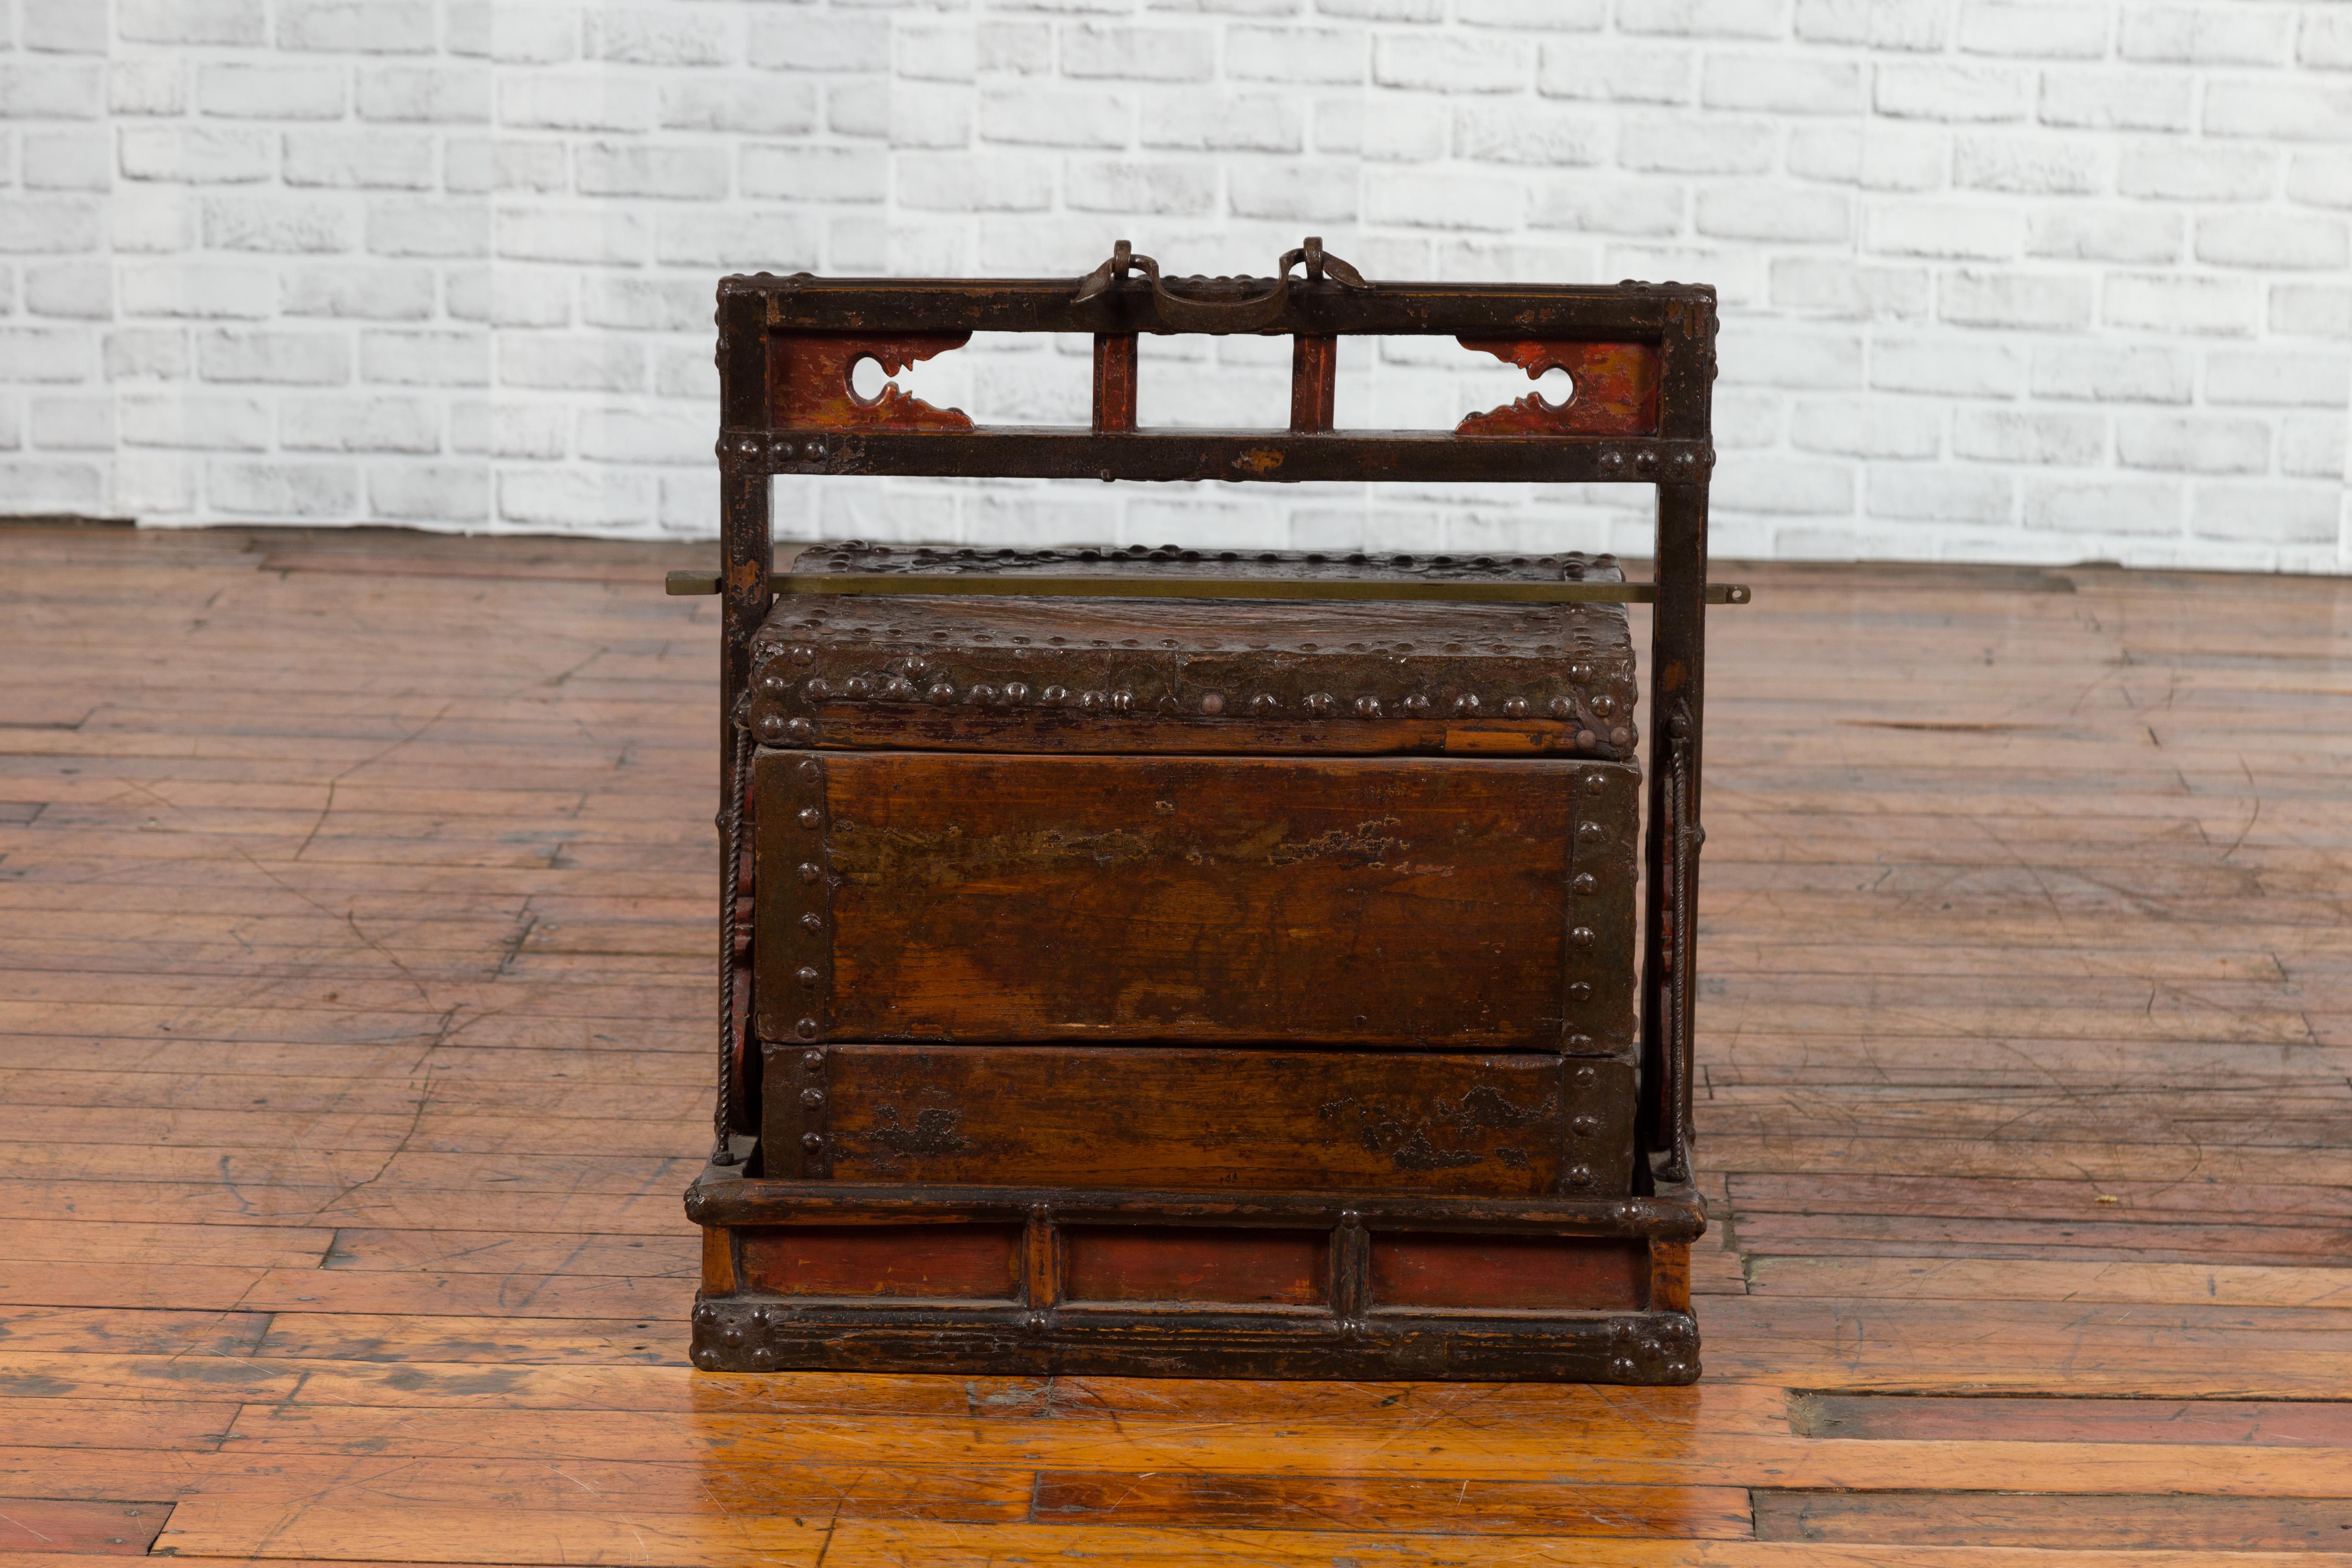 A Chinese Qing dynasty period wooden tiered wedding box from the 19th century, with carved sides, handle and nailheads. Created in China during the 19th century, this wedding box features a linear silhouette, accented with metal braces and